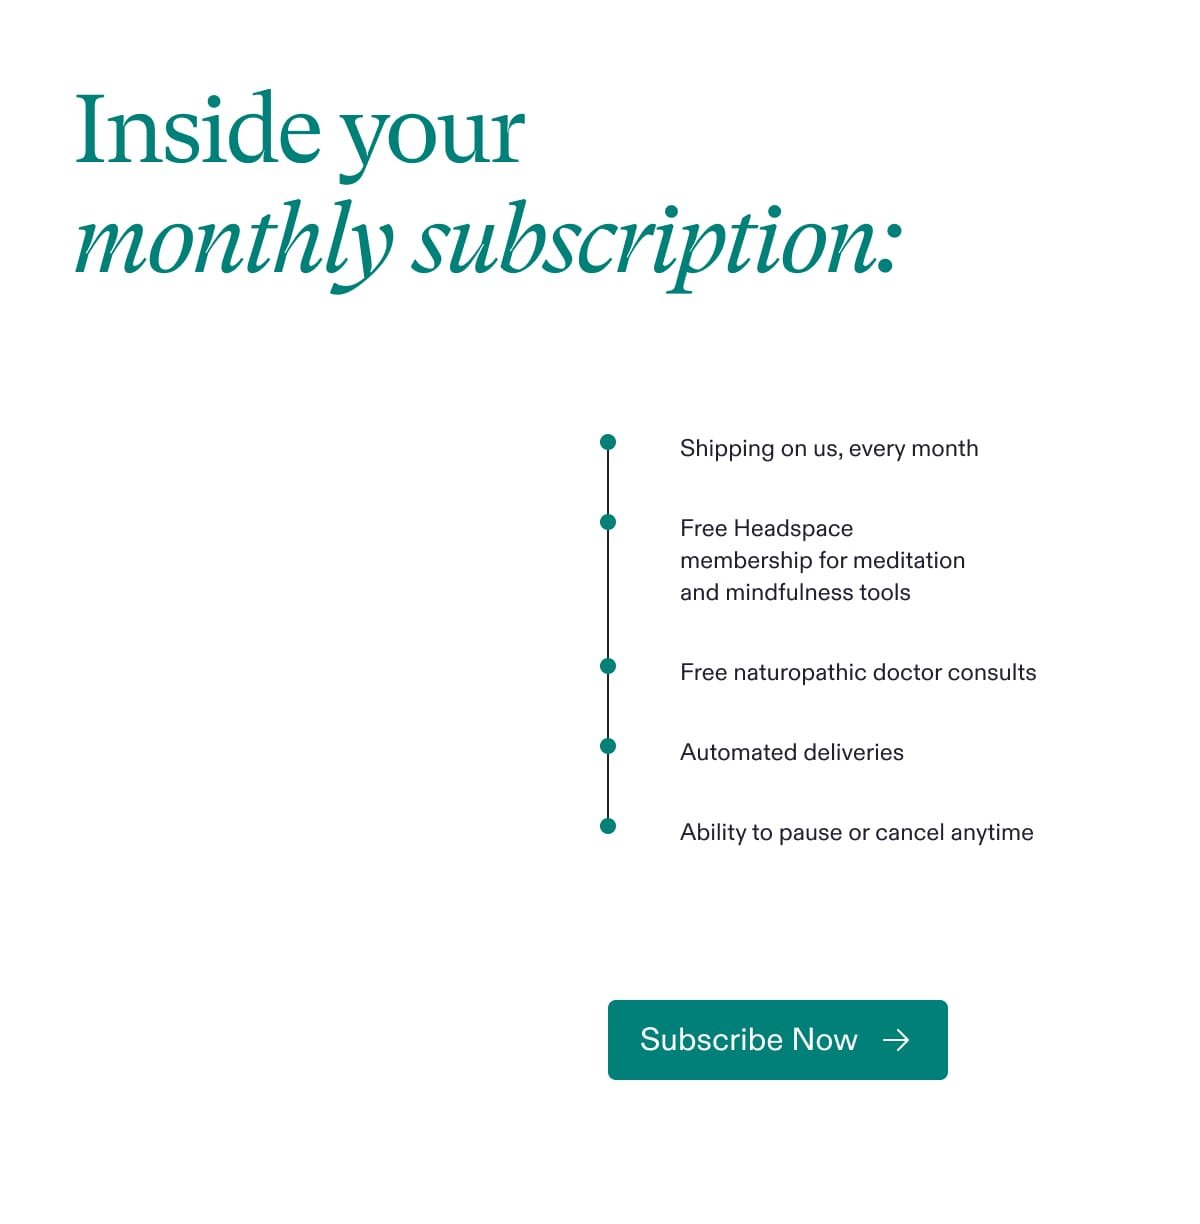 Inside your monthly subscription